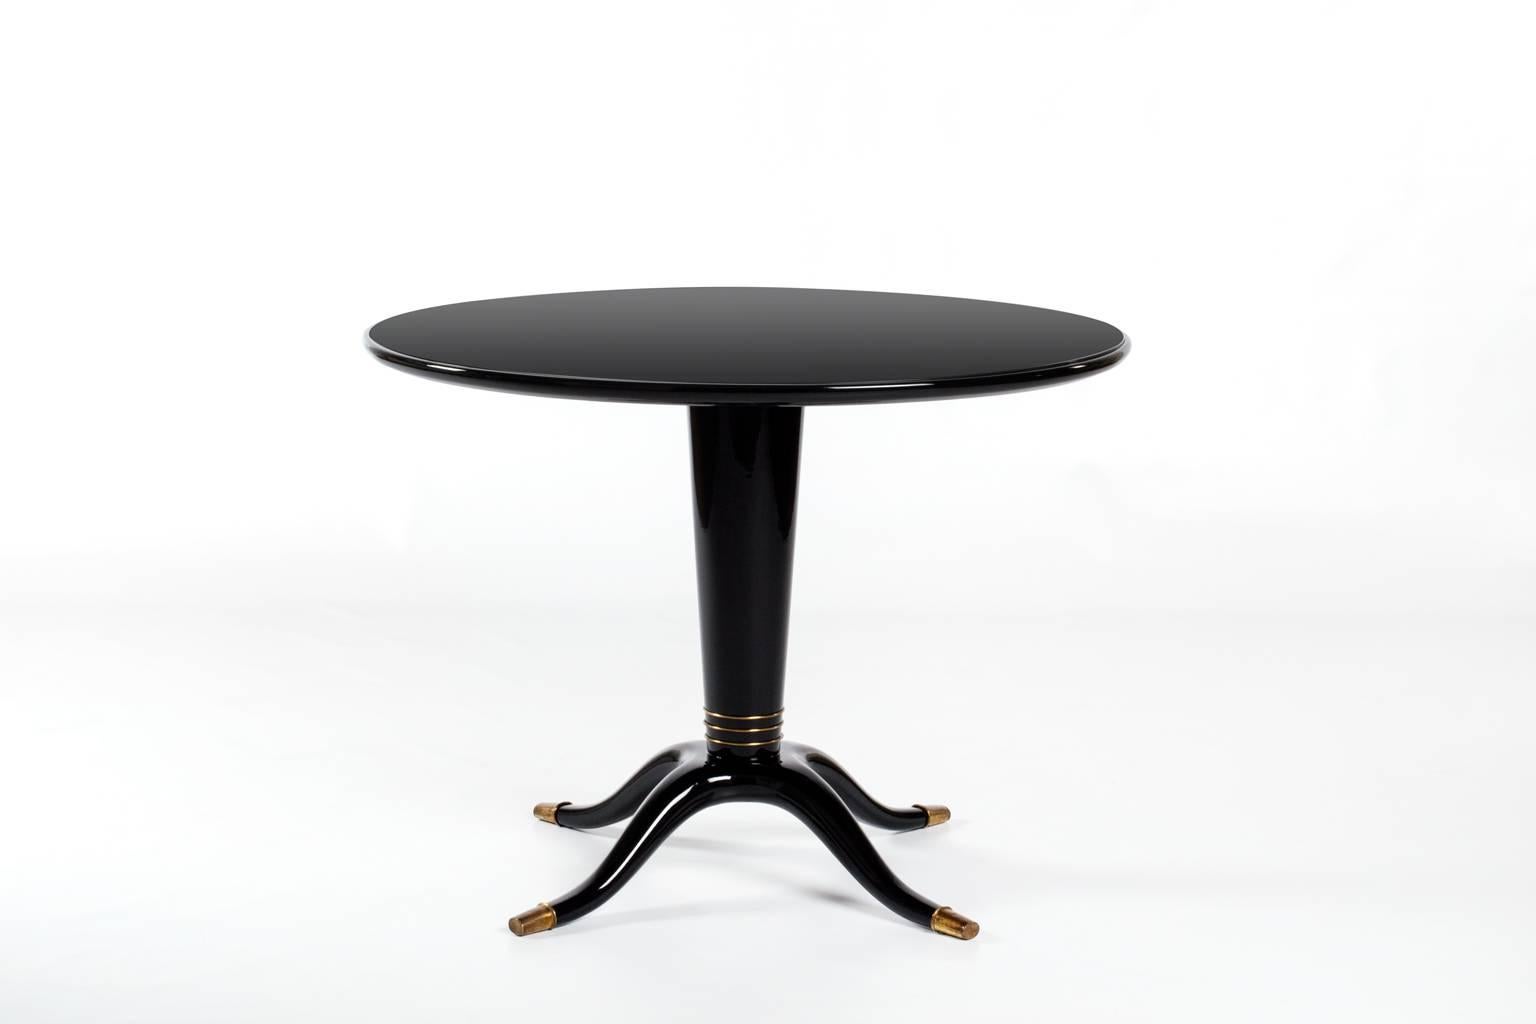 Stunning round pedestal table attributed to Poalo Buffa, Italy, 1950s. Beautiful organic ‘Octopus’ shaped base, really shows the excellent craftsmanship. Finished in a high gloss black lacquer with black mirrored glass on top. Completed with subtle